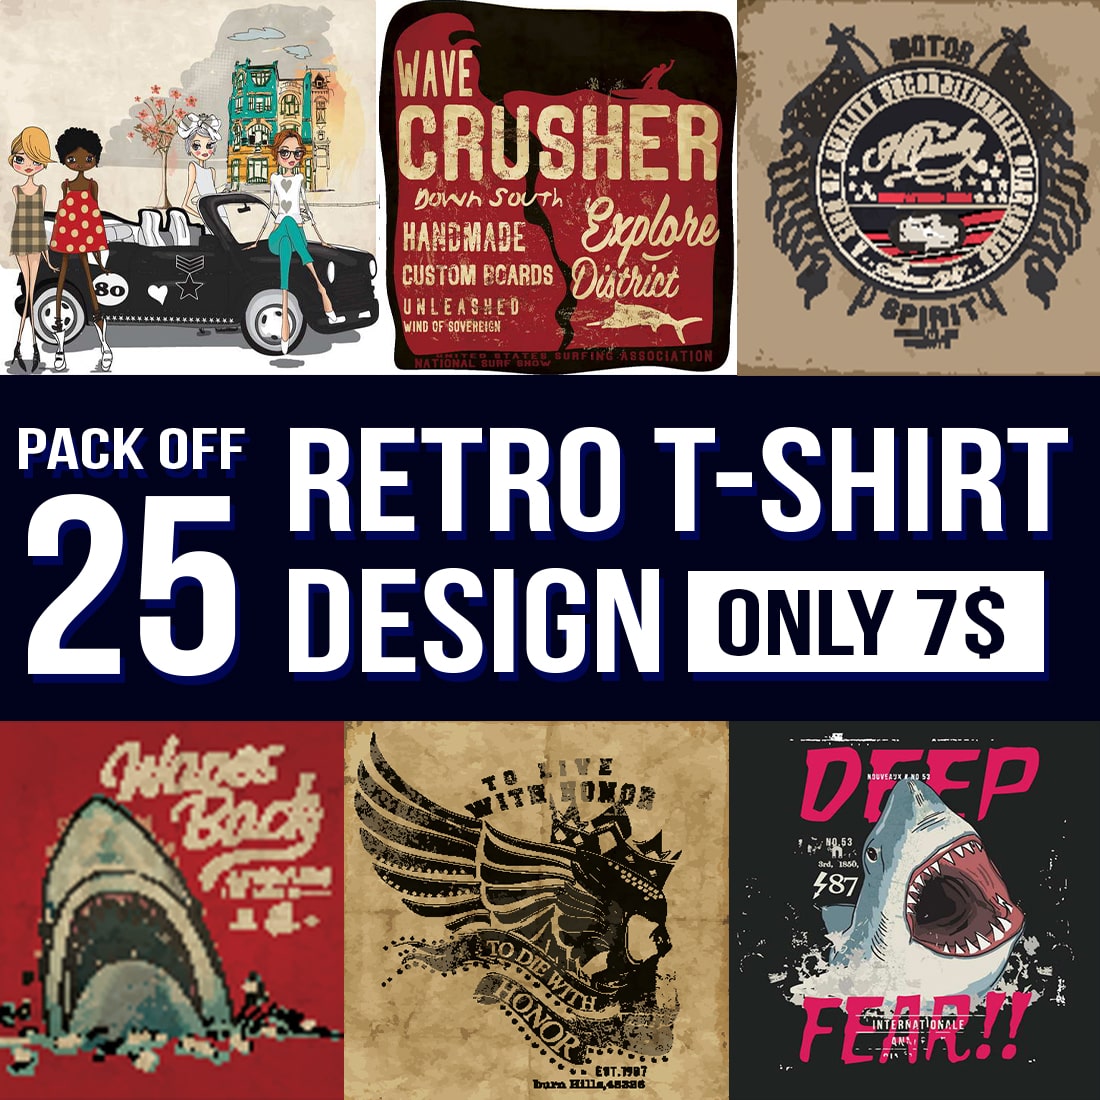 Pack Off 25 Retro T-Shirt Designs Cover Image.